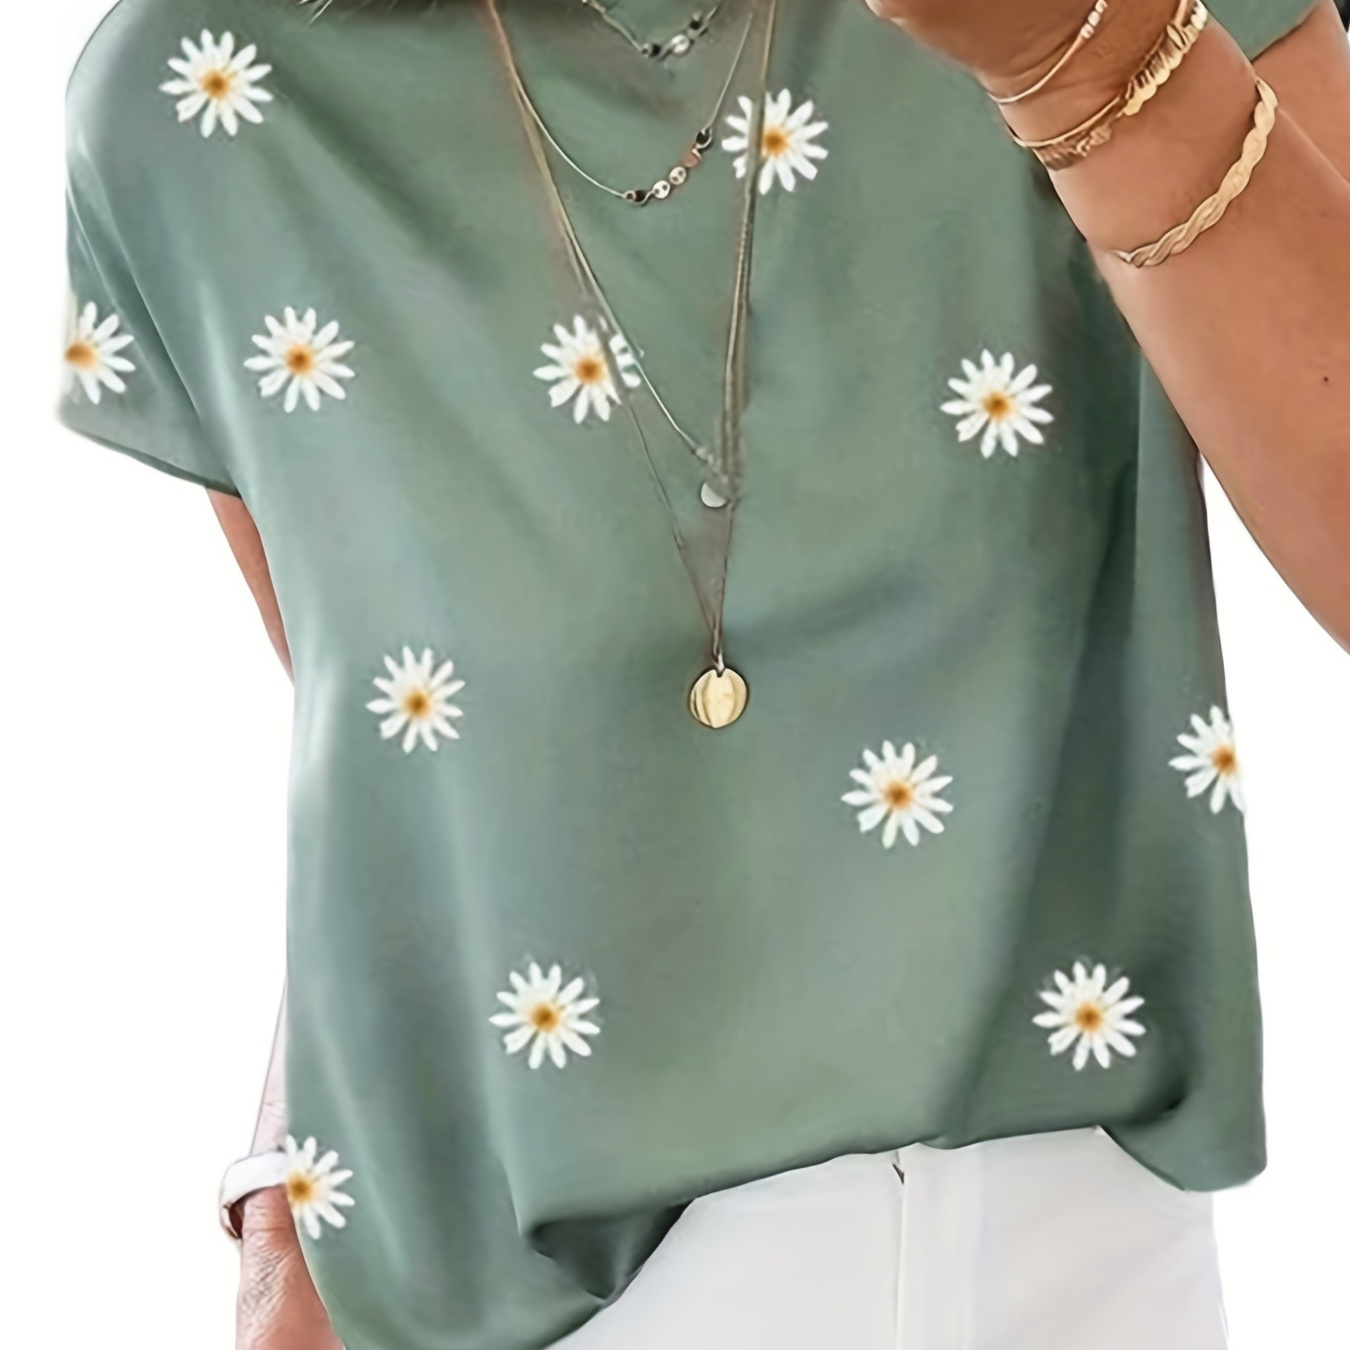 

Daisy Print T-shirt, Crew Neck Short Sleeve T-shirt, Casual Every Day Tops, Women's Clothing